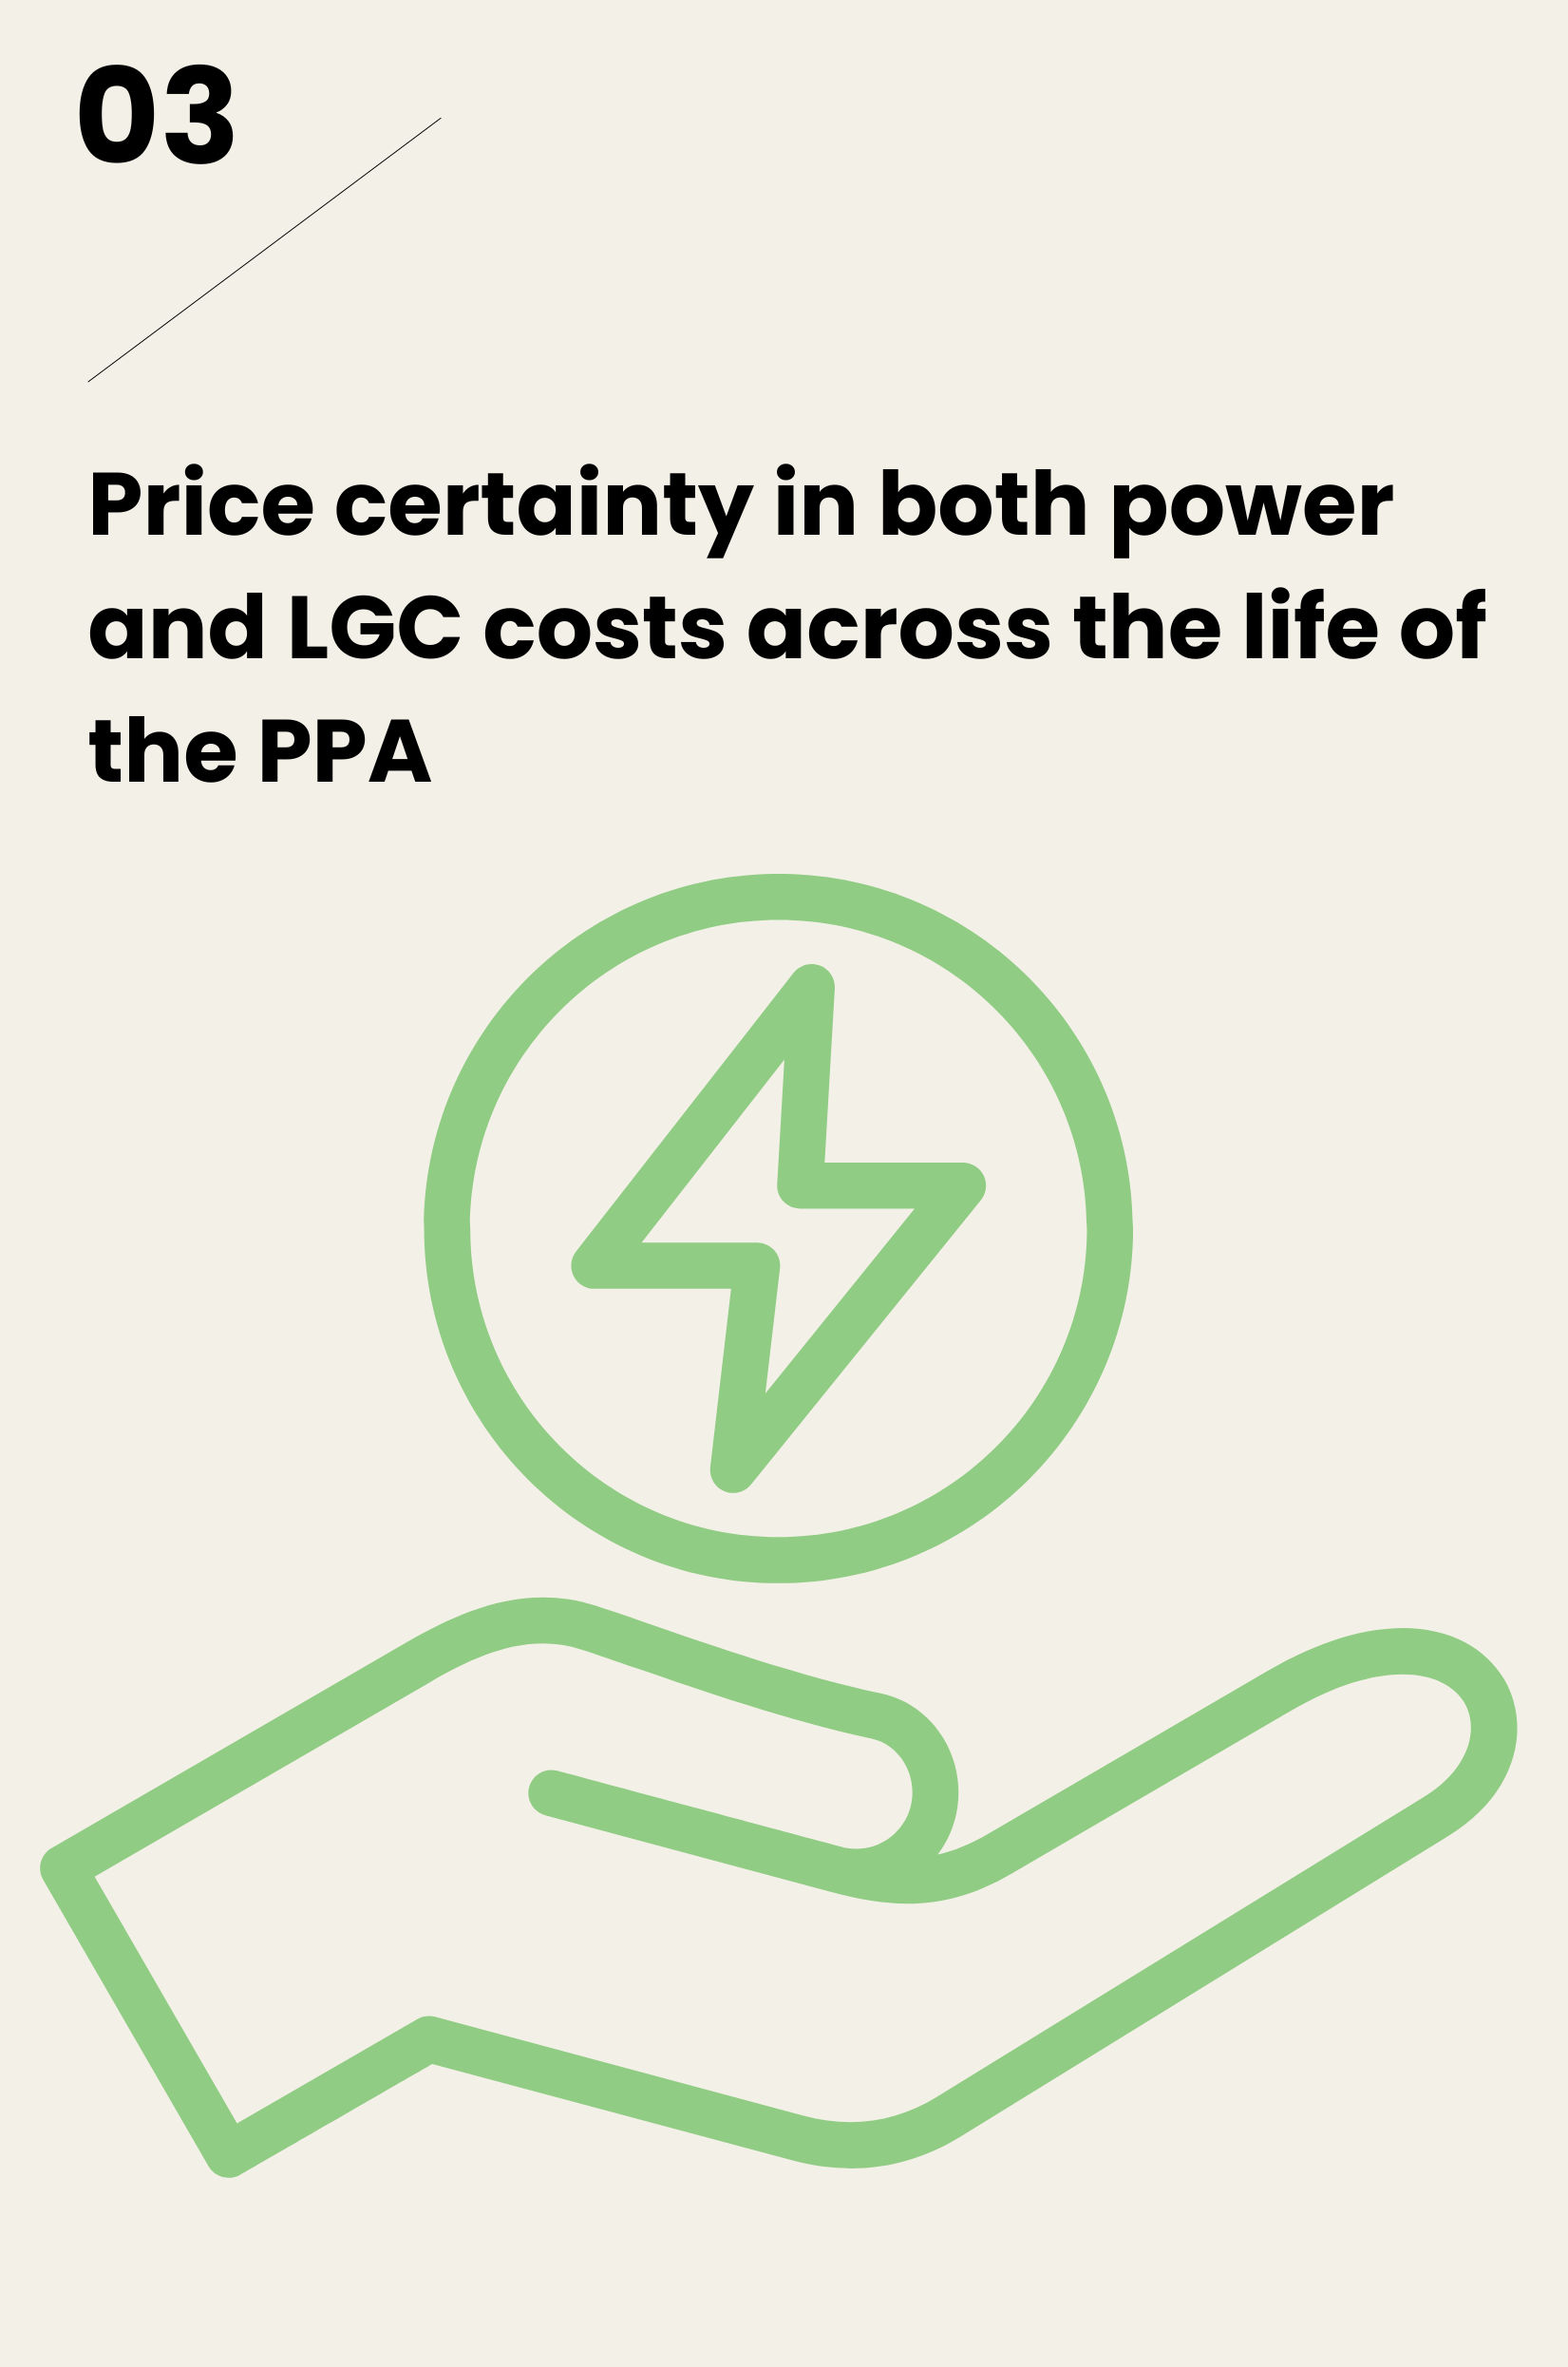 Price certainty in both power and LGC costs across the life of the PPA